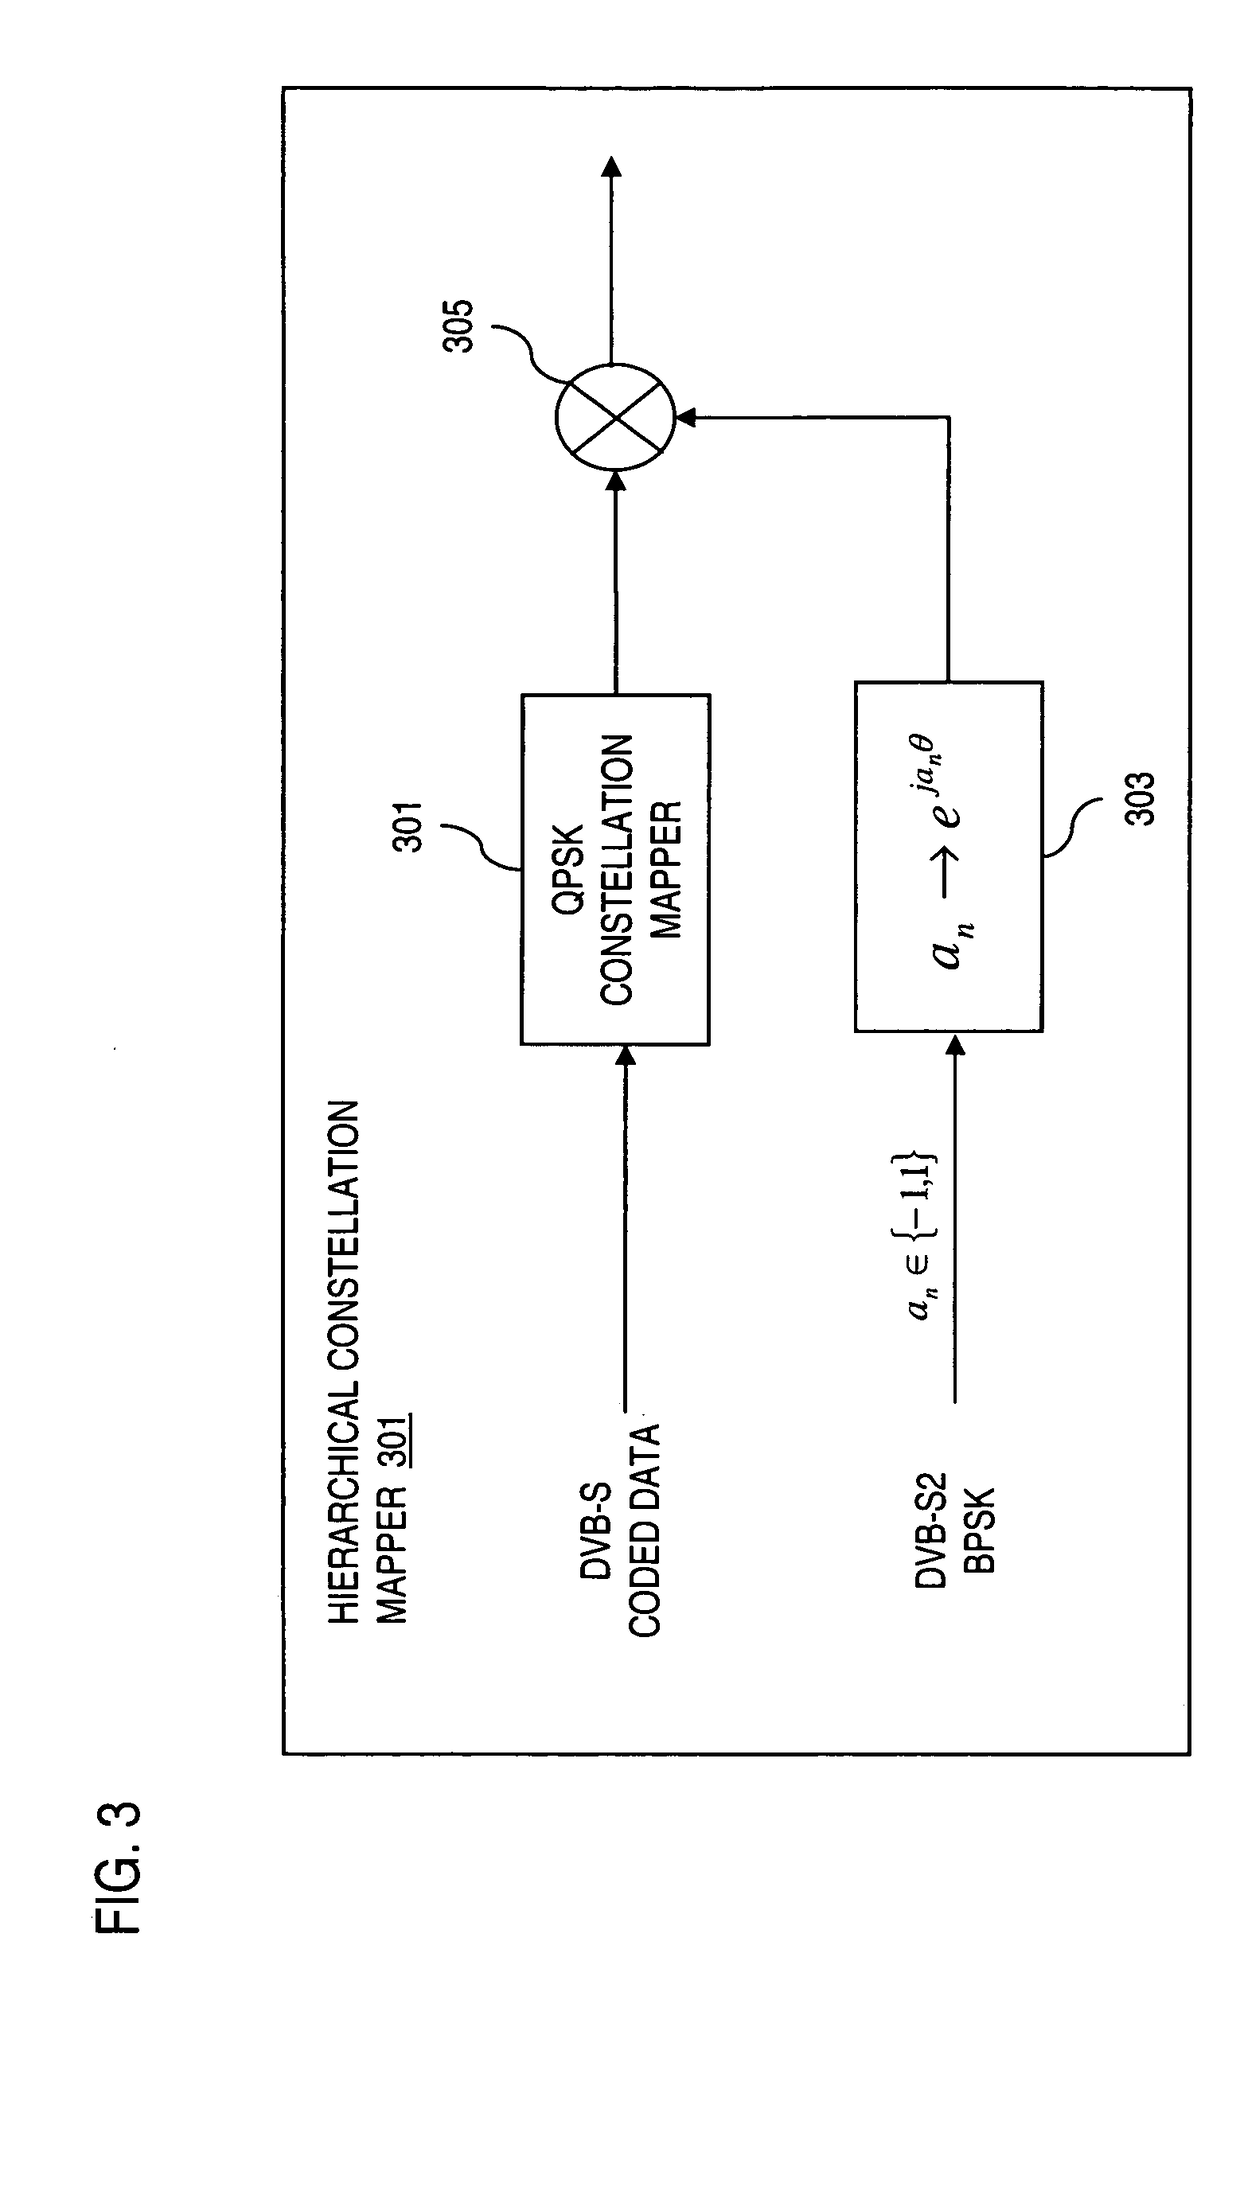 Method and apparatus for providing signal acquisition and frame synchronization in a hierarchical modulation scheme